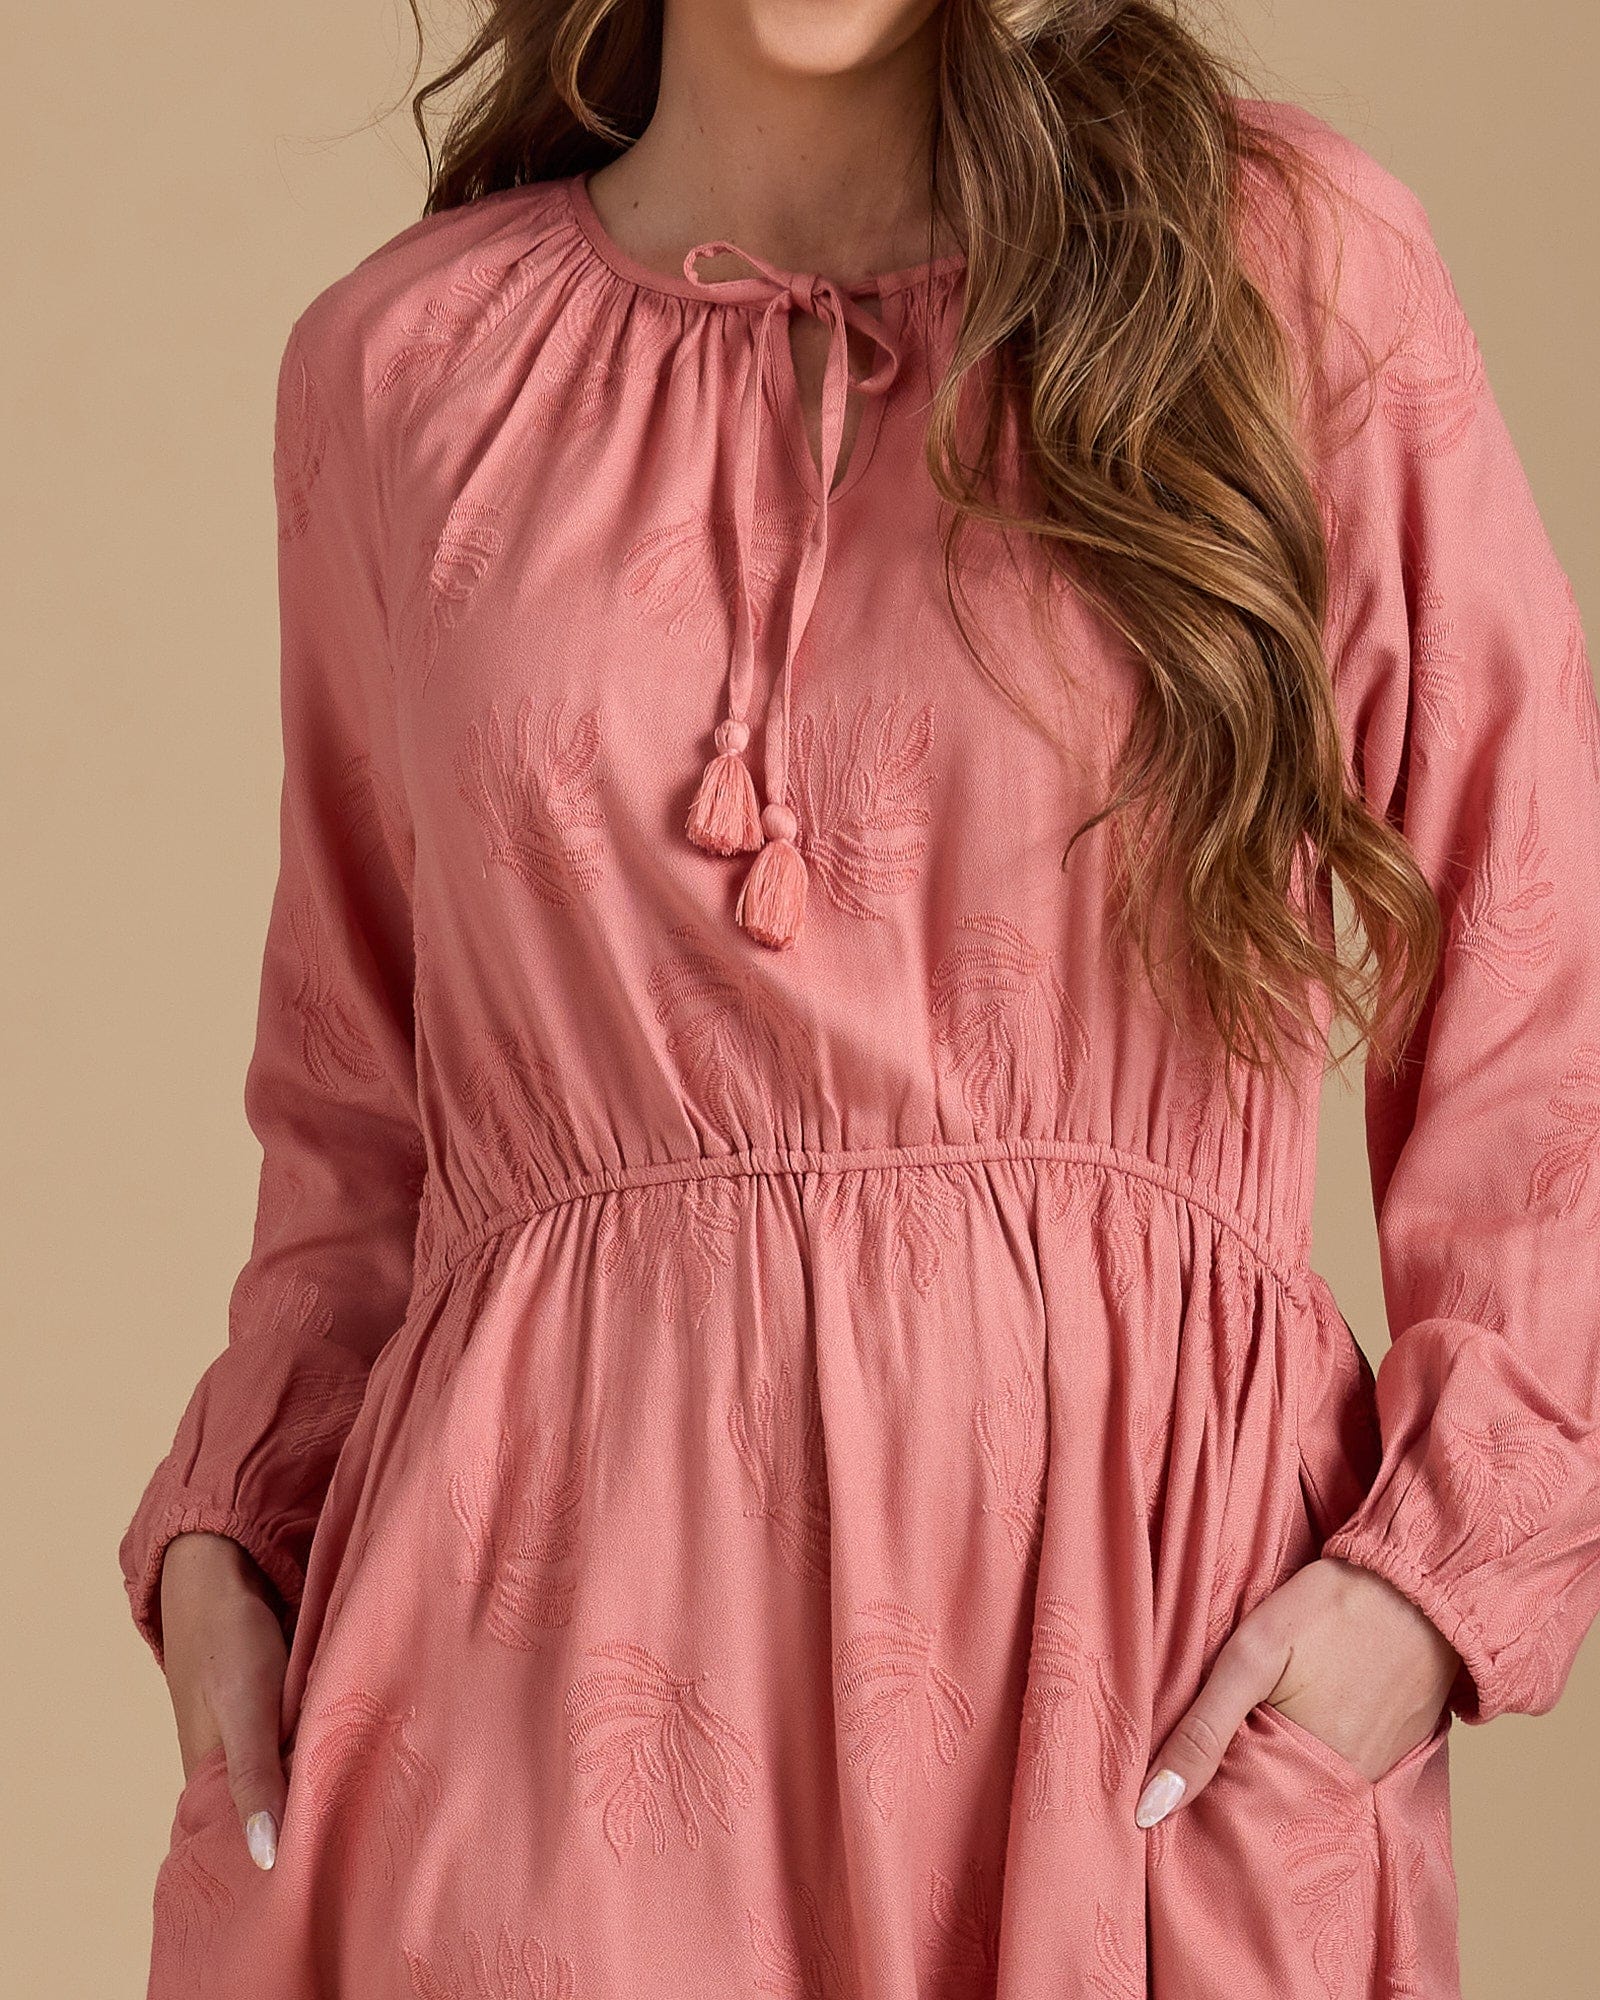 Woman in a long sleeve, knee-length pink dress with pockets